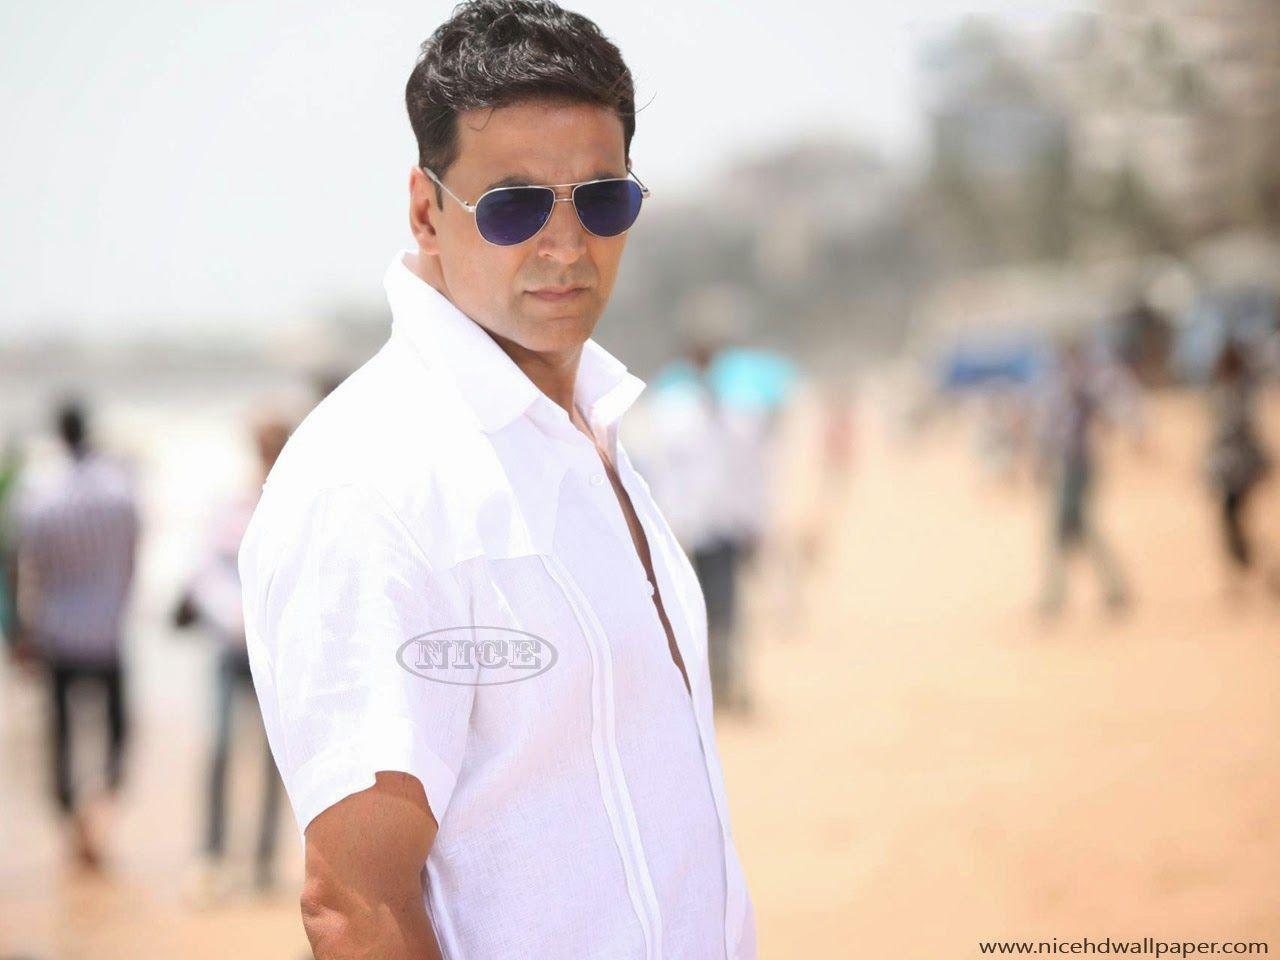 Akshay kumar Photo. ALL THE BEST DRIVERS & SOFTWARES & VIDEO